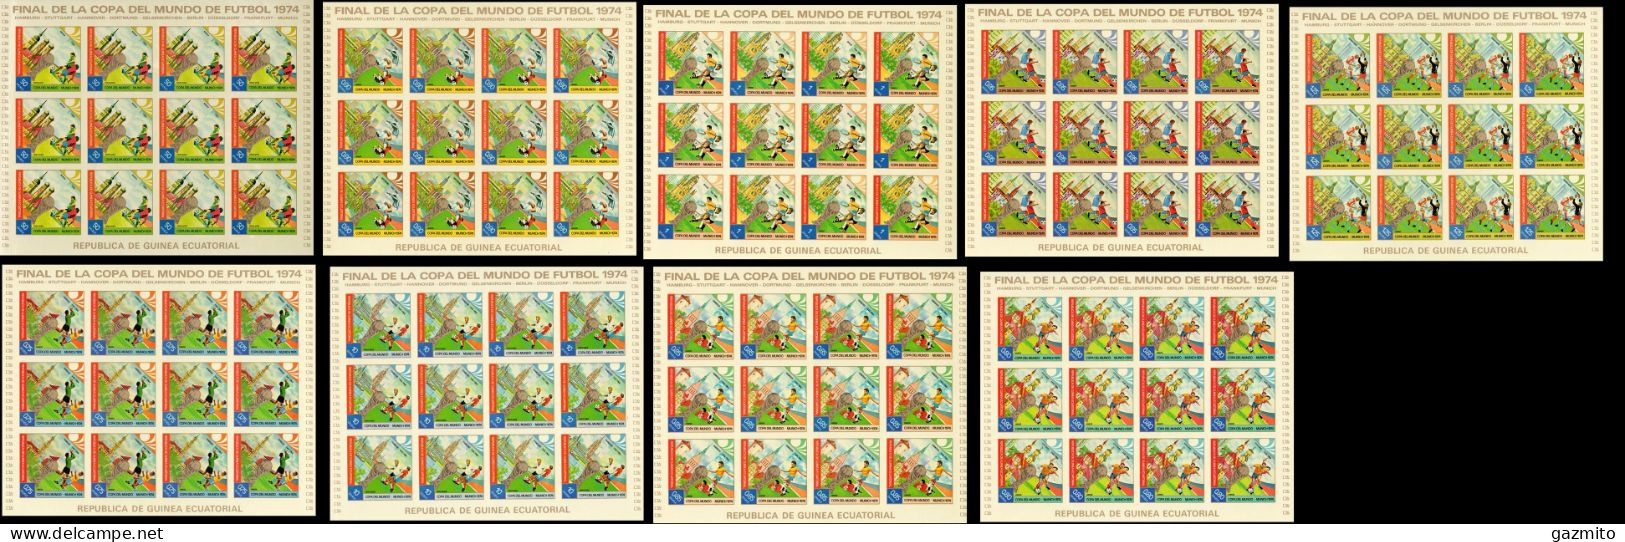 Guinea Equat. 1974, Football World Cup In Germany, 9sheetlets IMPERFORATED - Guinea Equatoriale